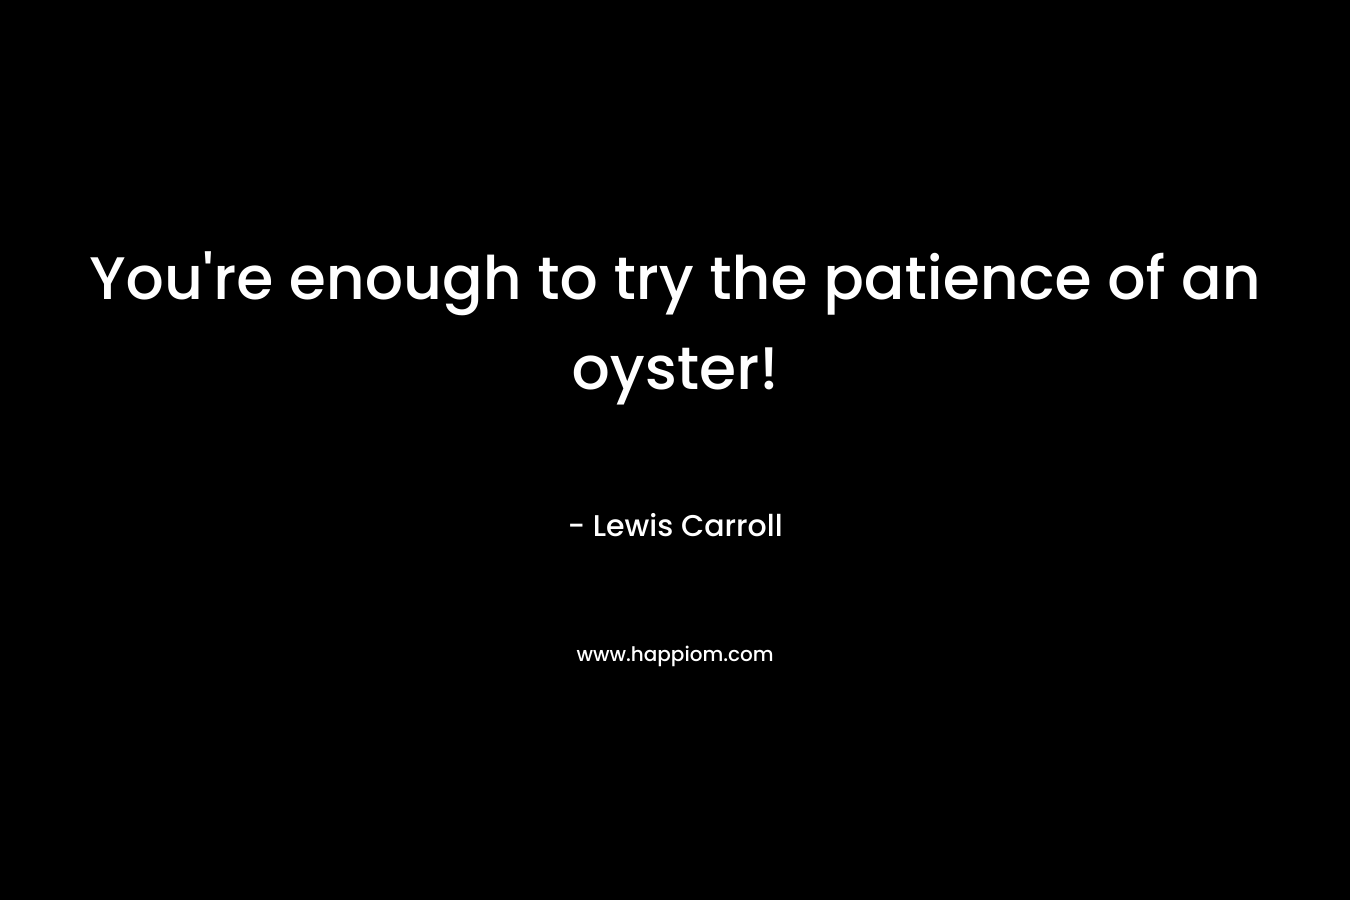 You're enough to try the patience of an oyster!